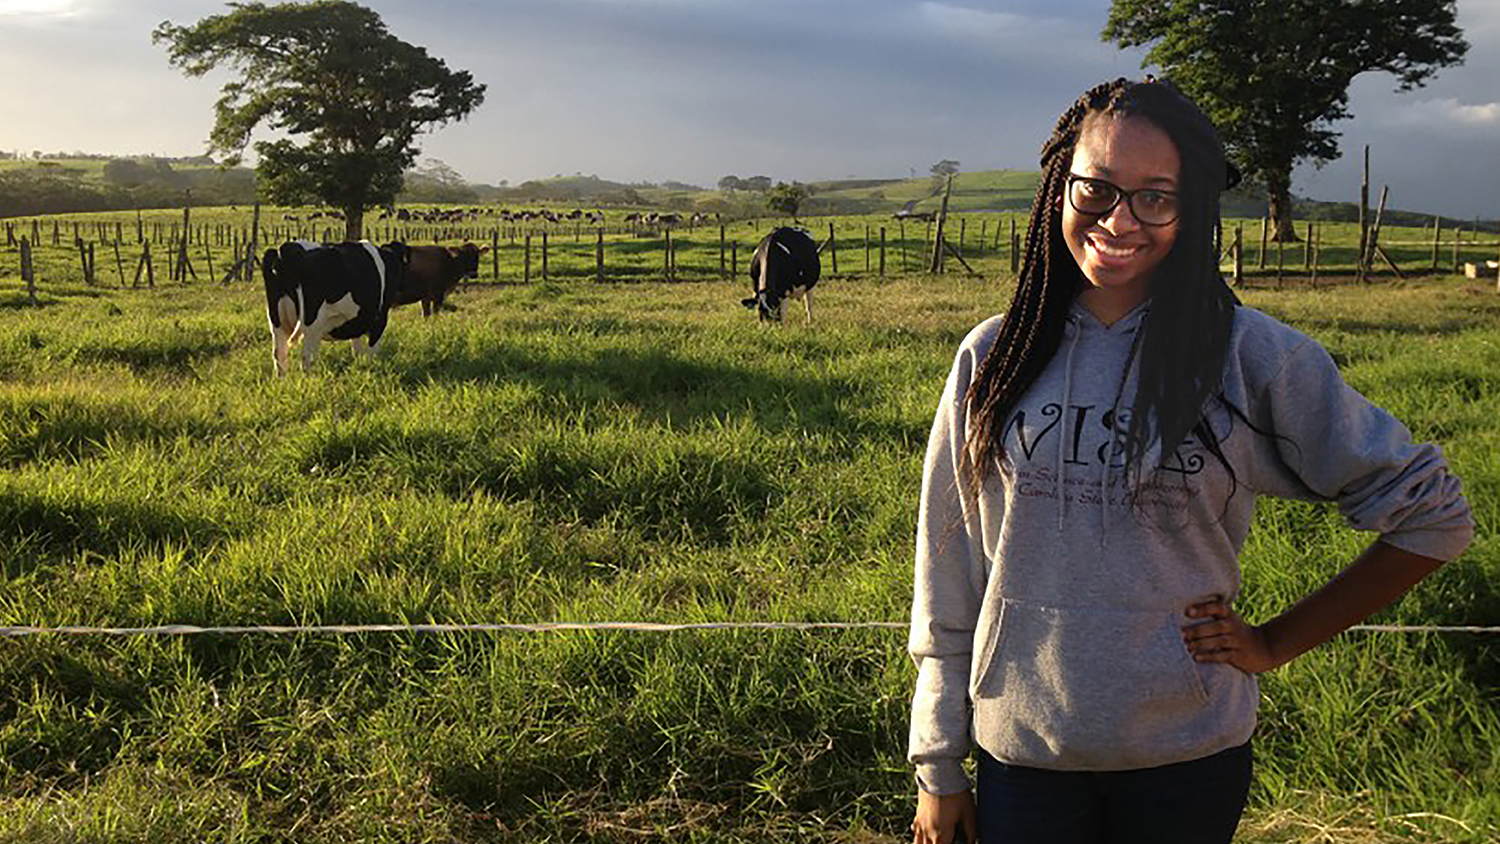 CALS student Nashea Williams in front of a pasture of cows